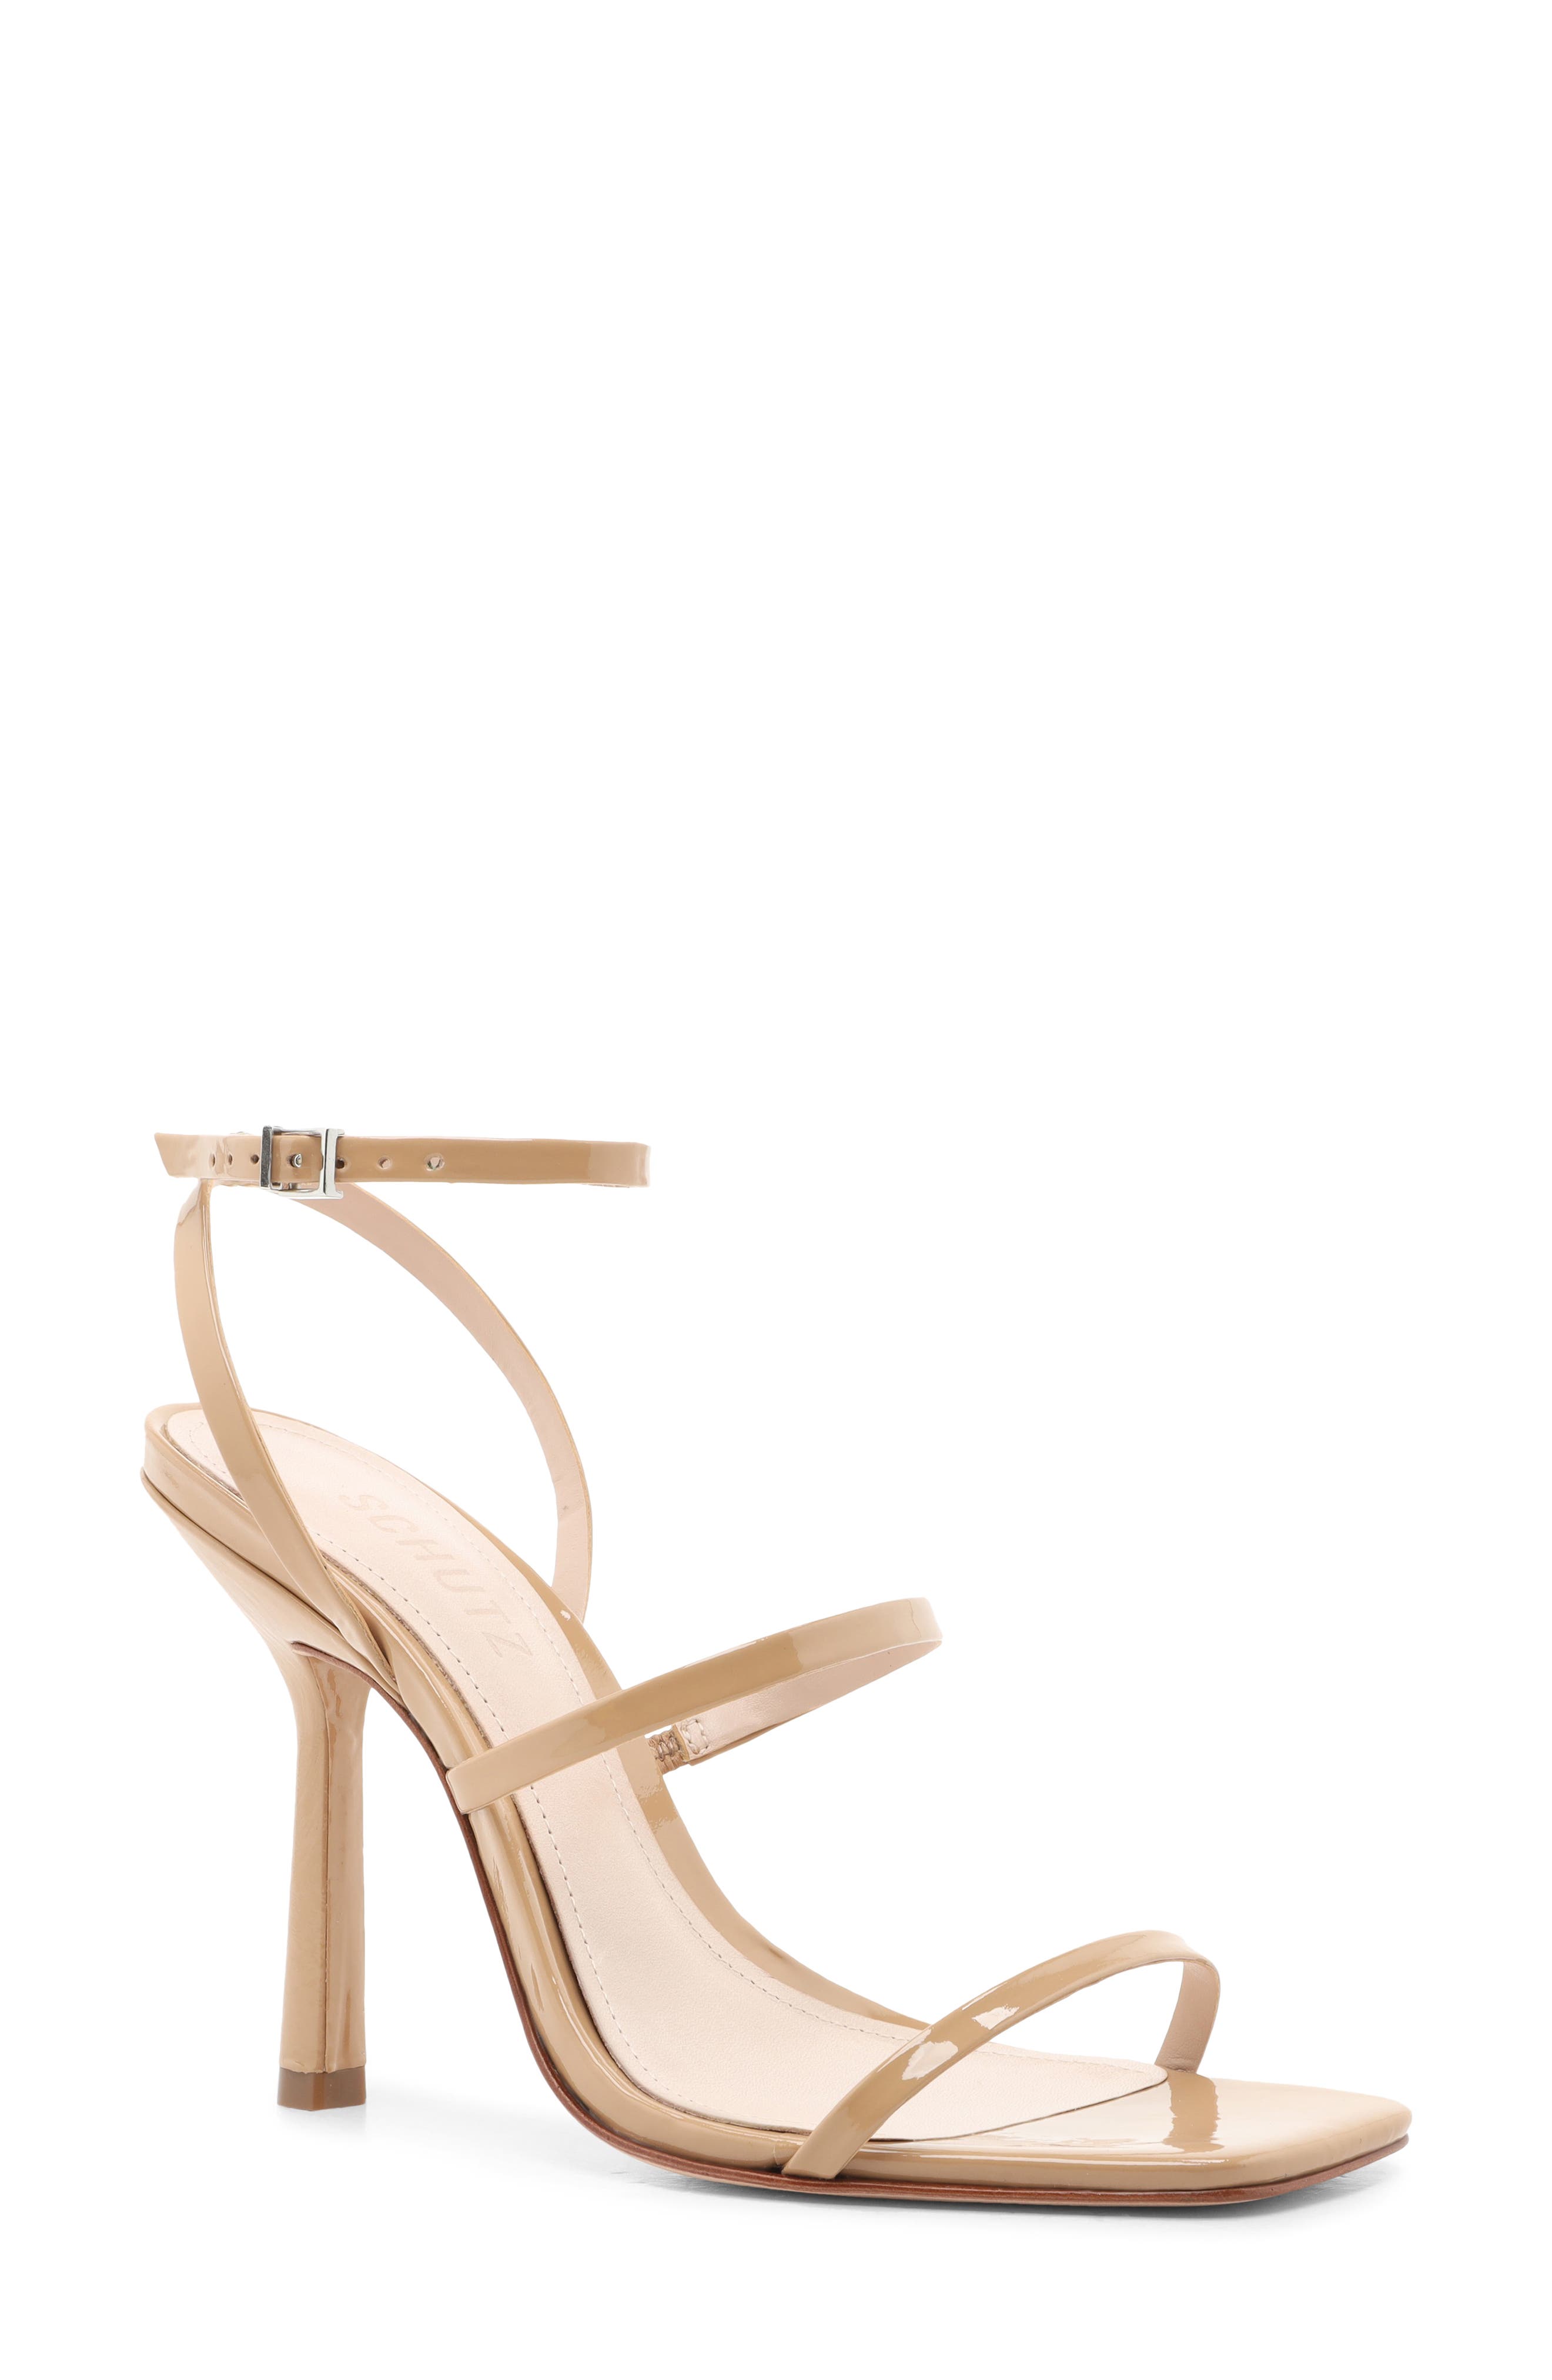 nude shoes strappy